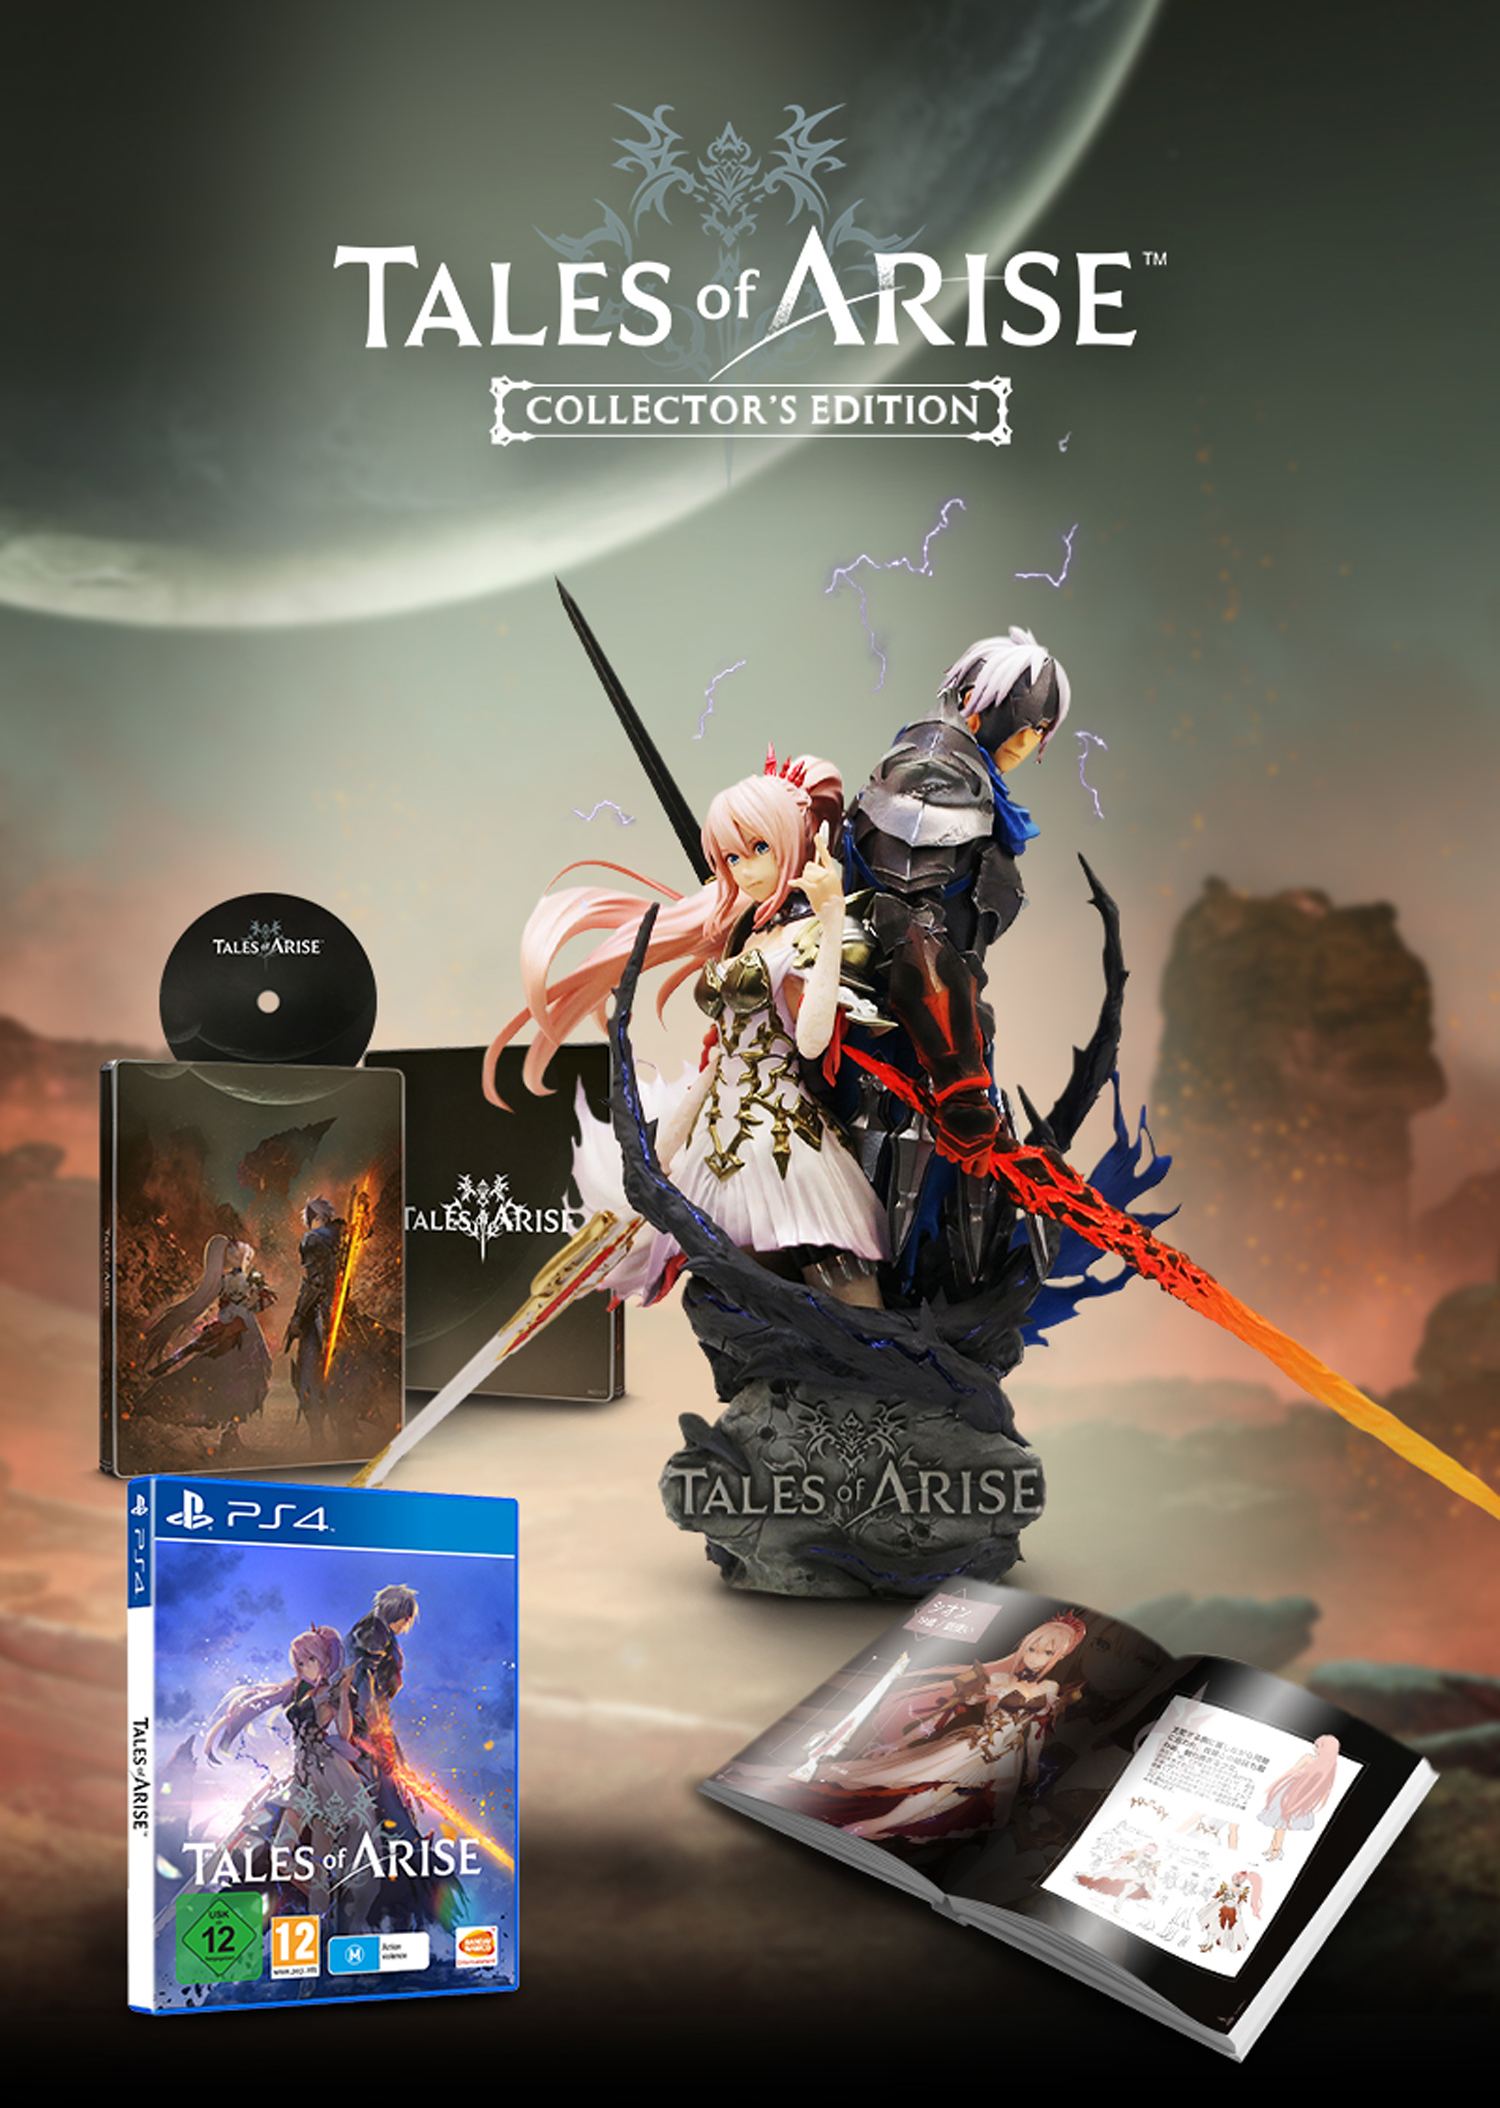 Tales of Arise [Collector's Edition] for PlayStation 4